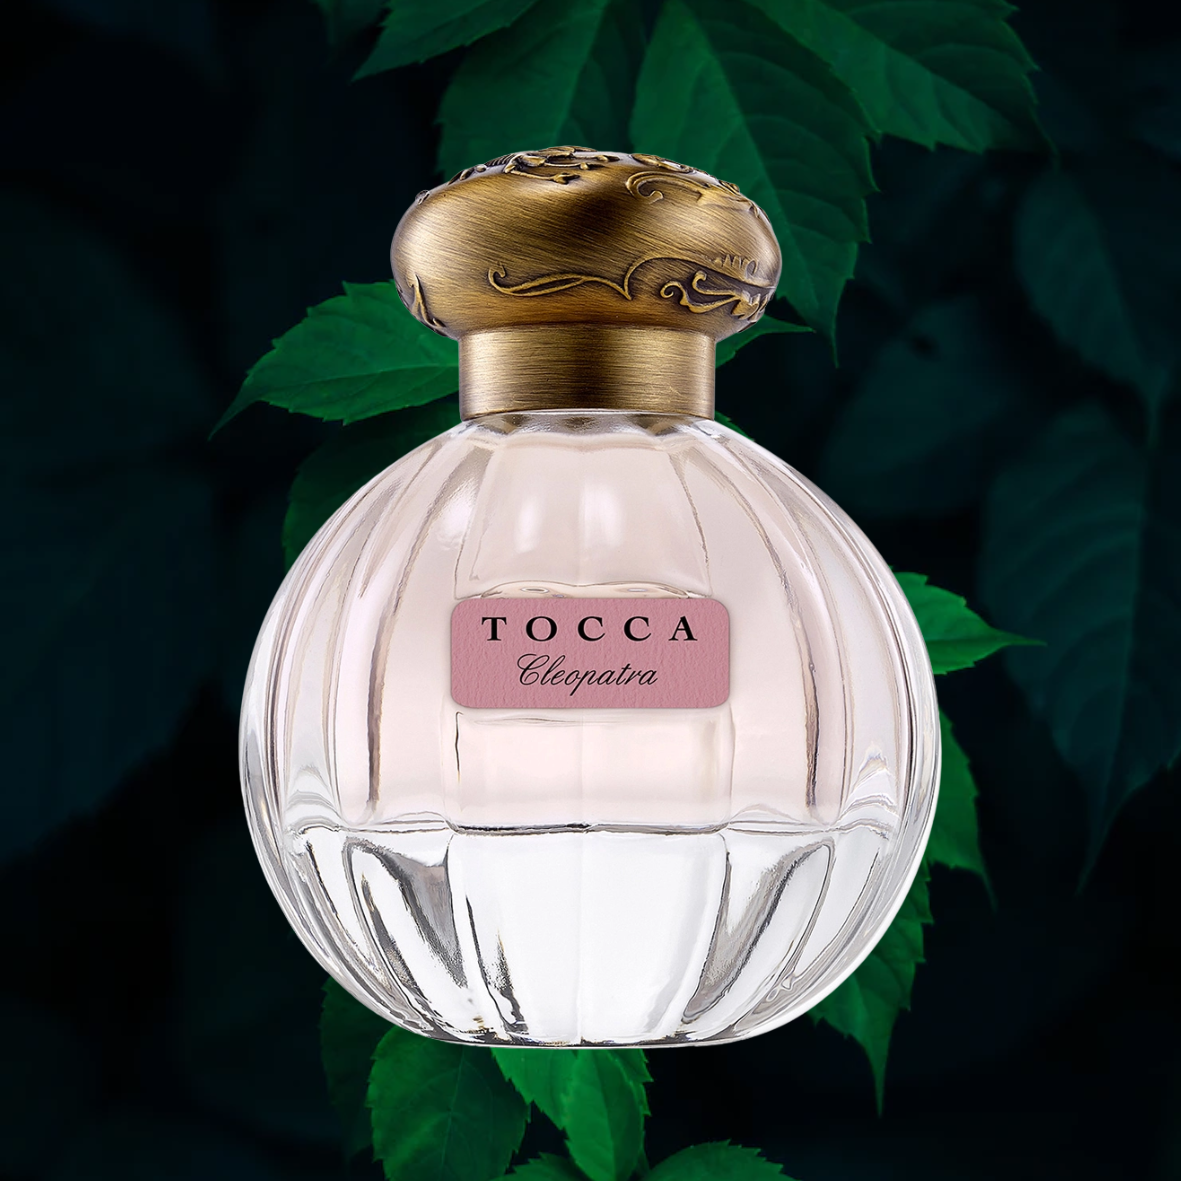 Tocca-Cleopatra
Hypoallergenic Perfumes